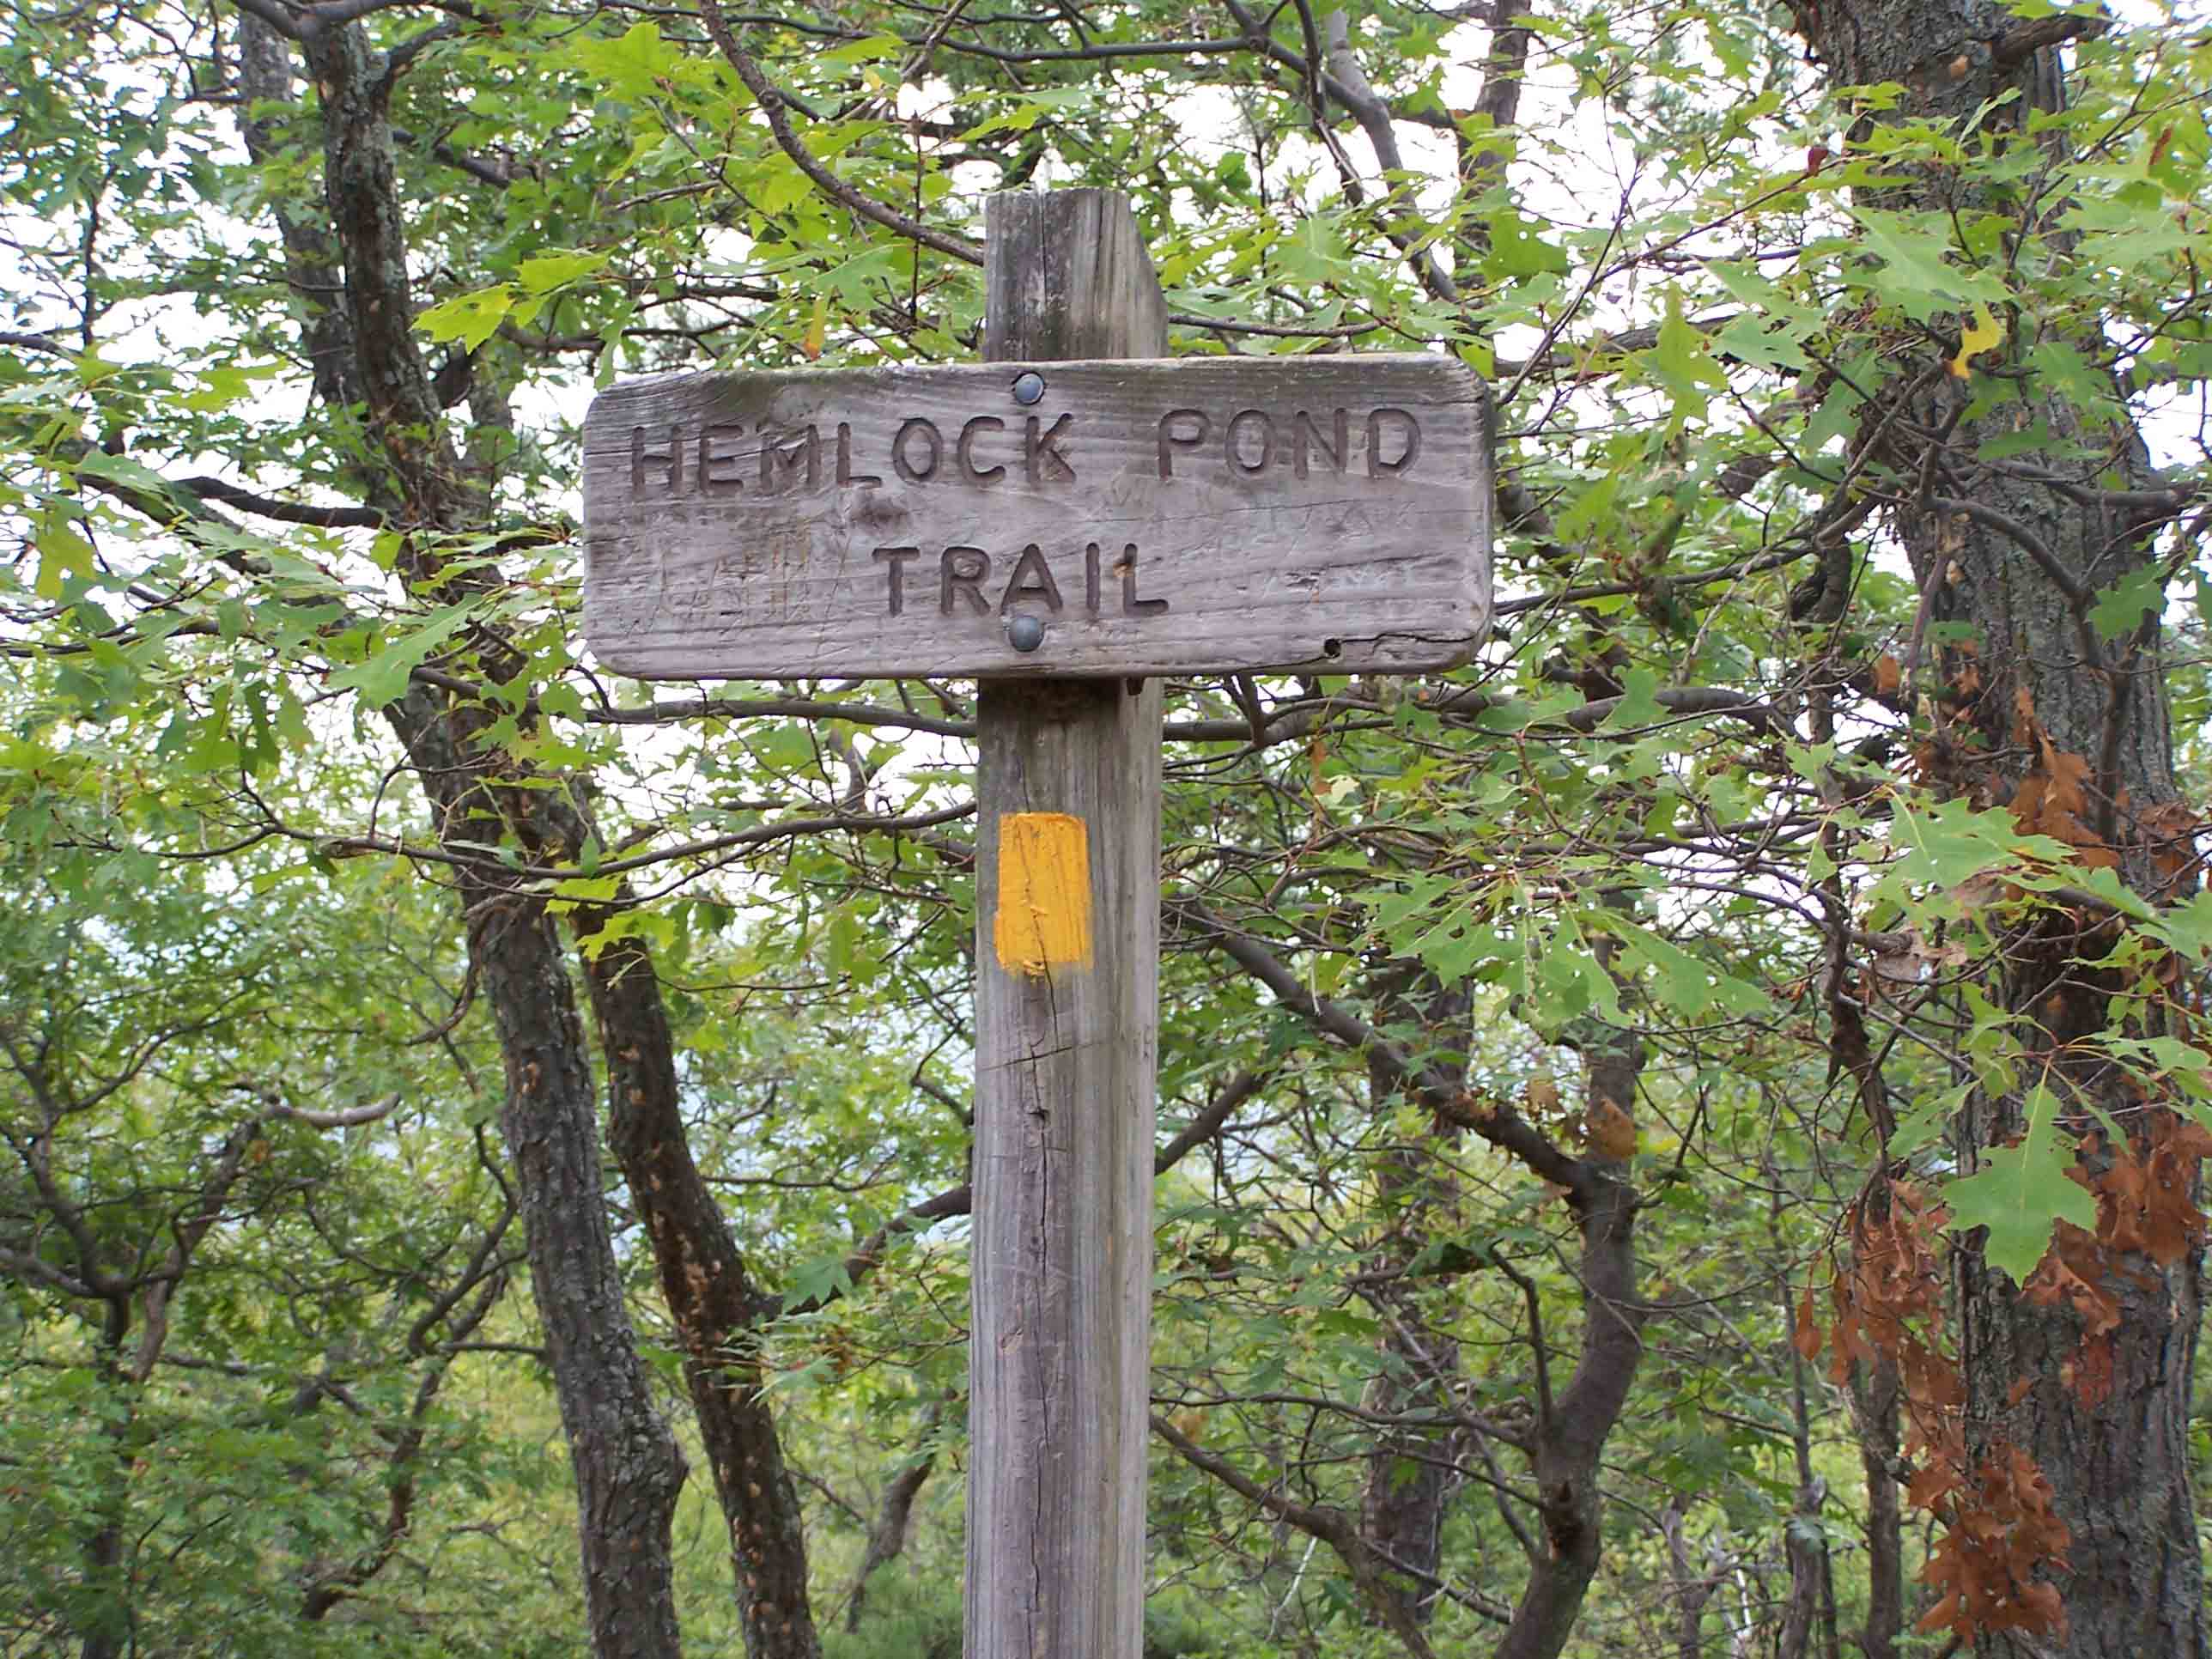 mm 8.5 - Hemlock Pond Trail. Courtesy at@rohland.org